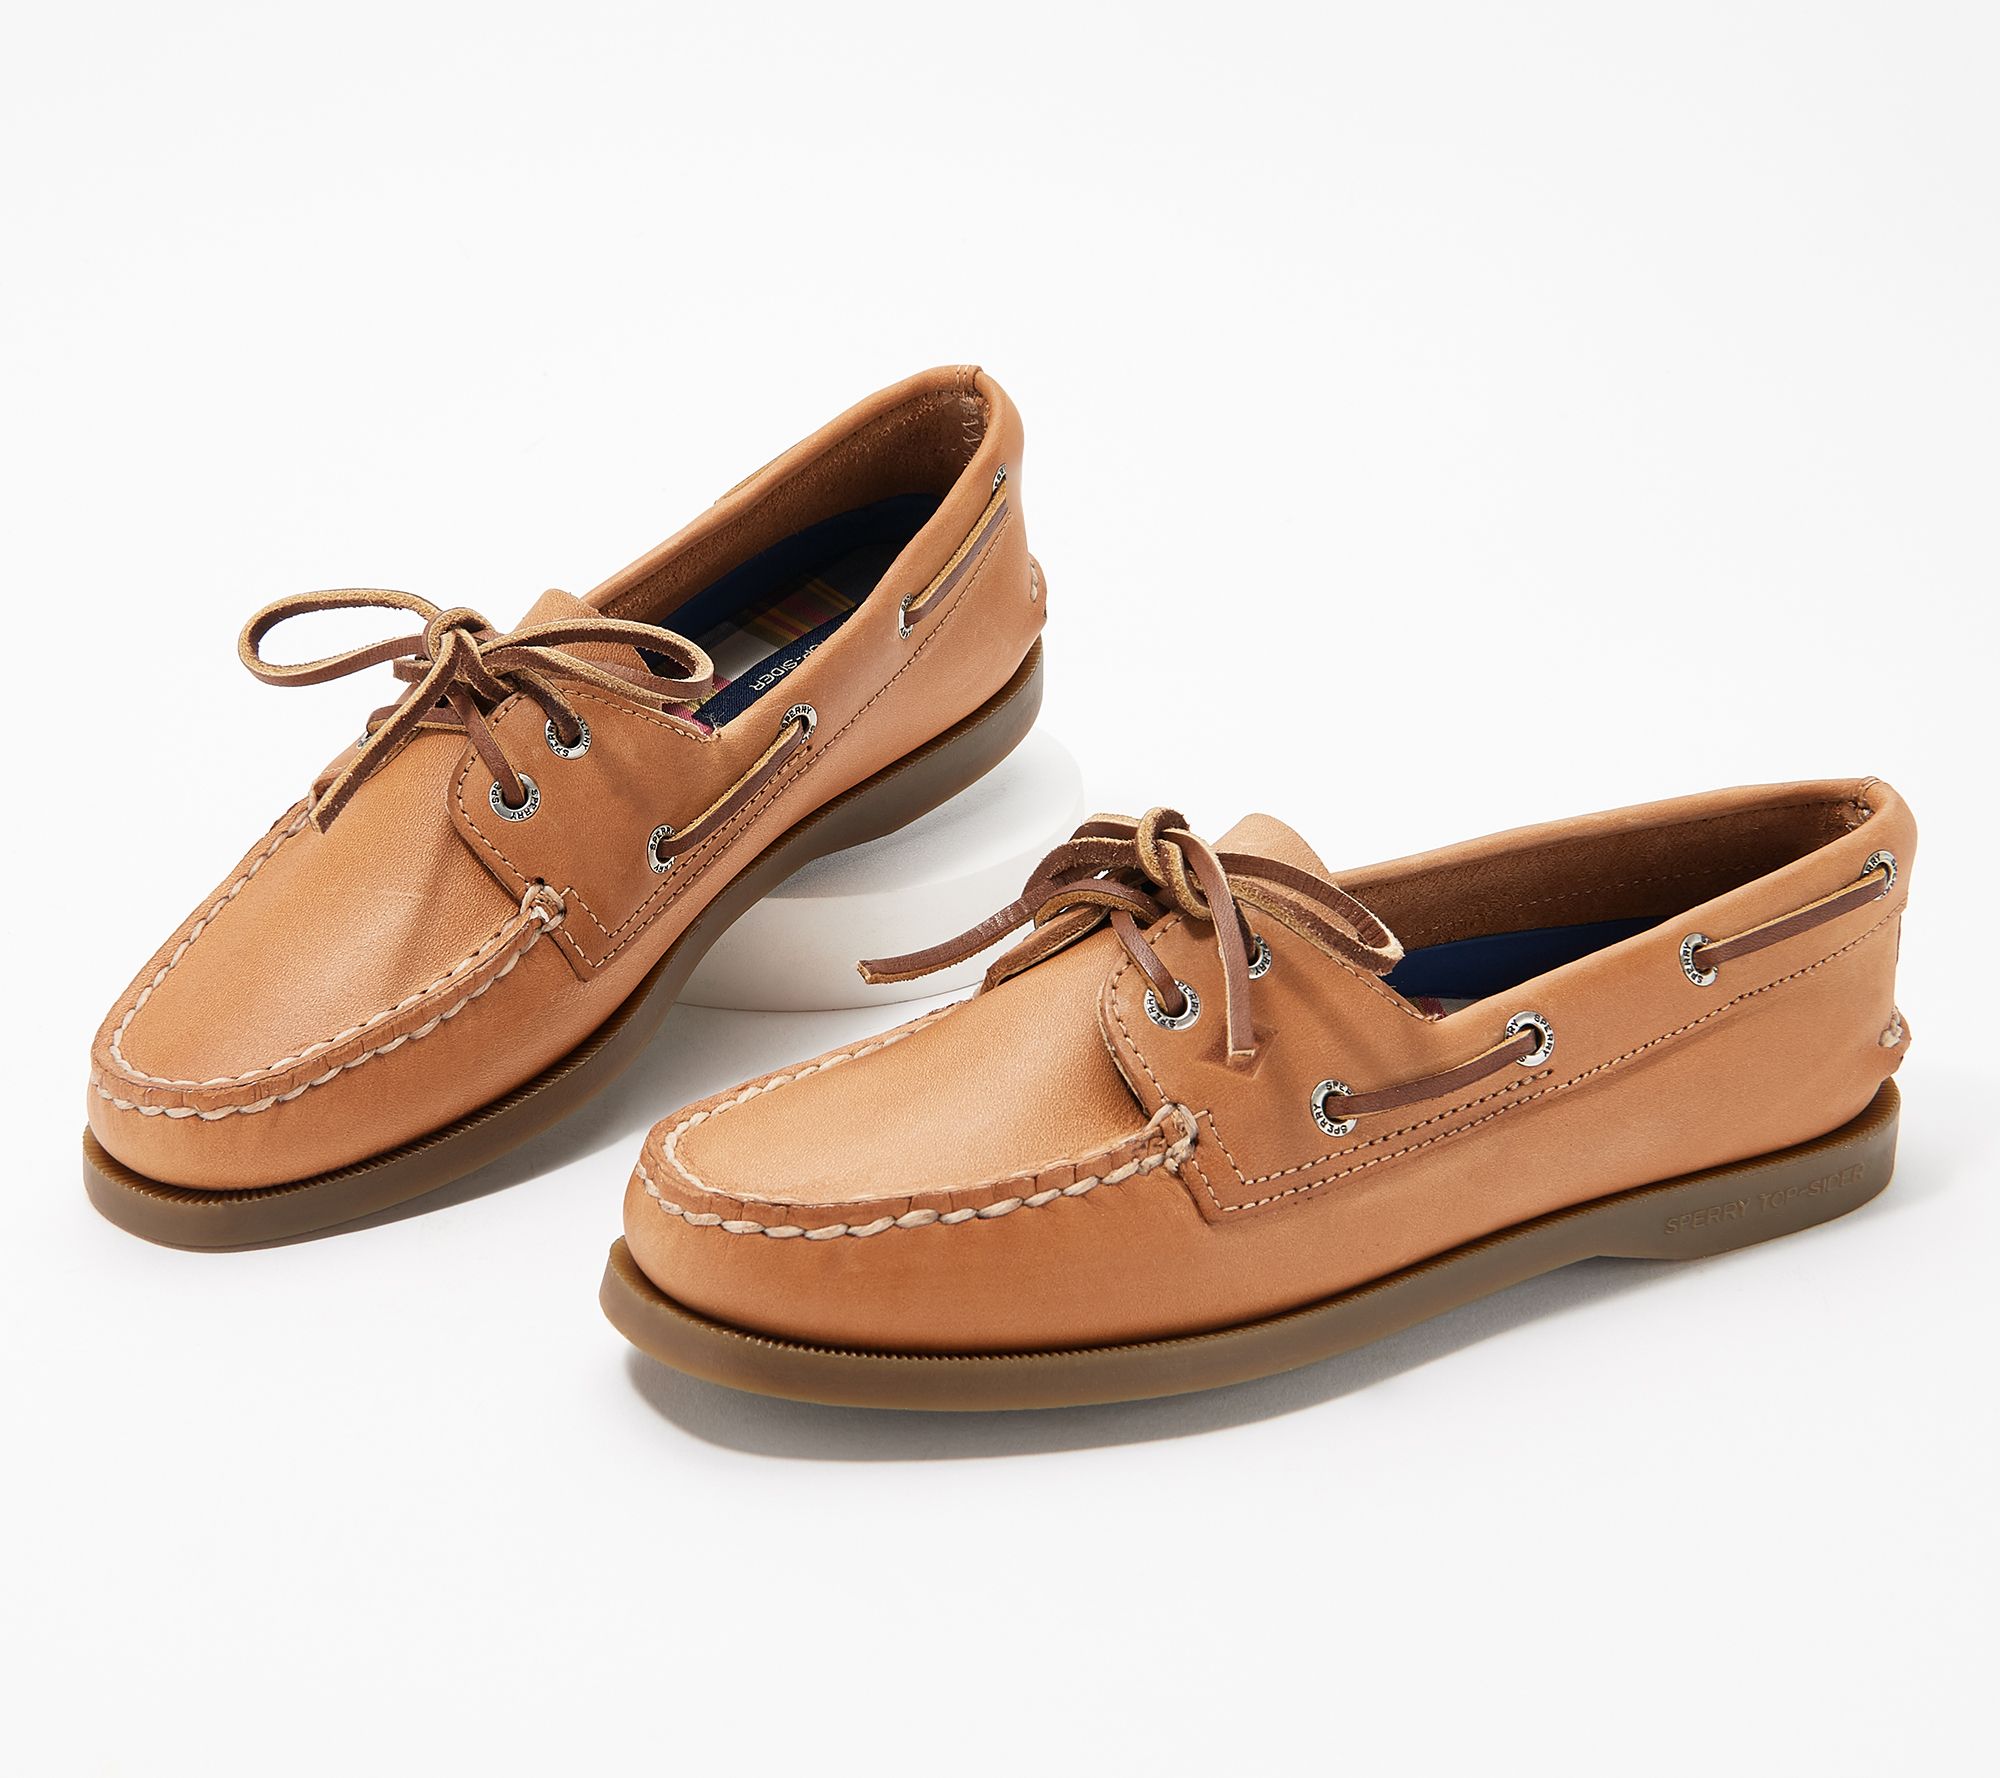 How to Relace Sperry and other Boat Shoes (Easy Way) 